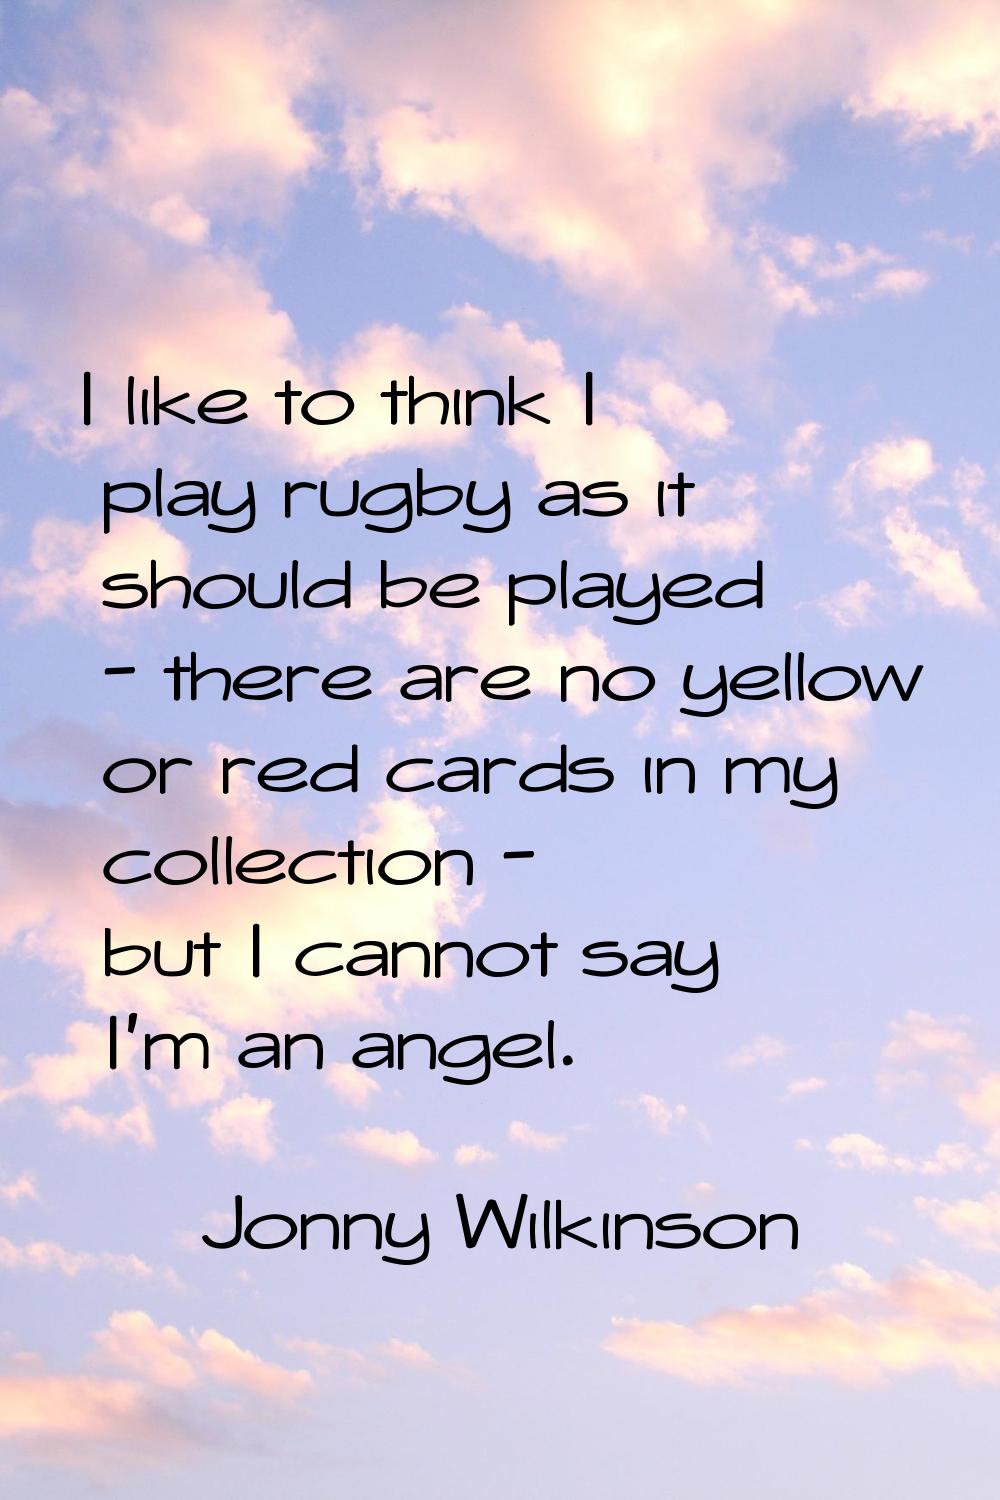 I like to think I play rugby as it should be played - there are no yellow or red cards in my collec